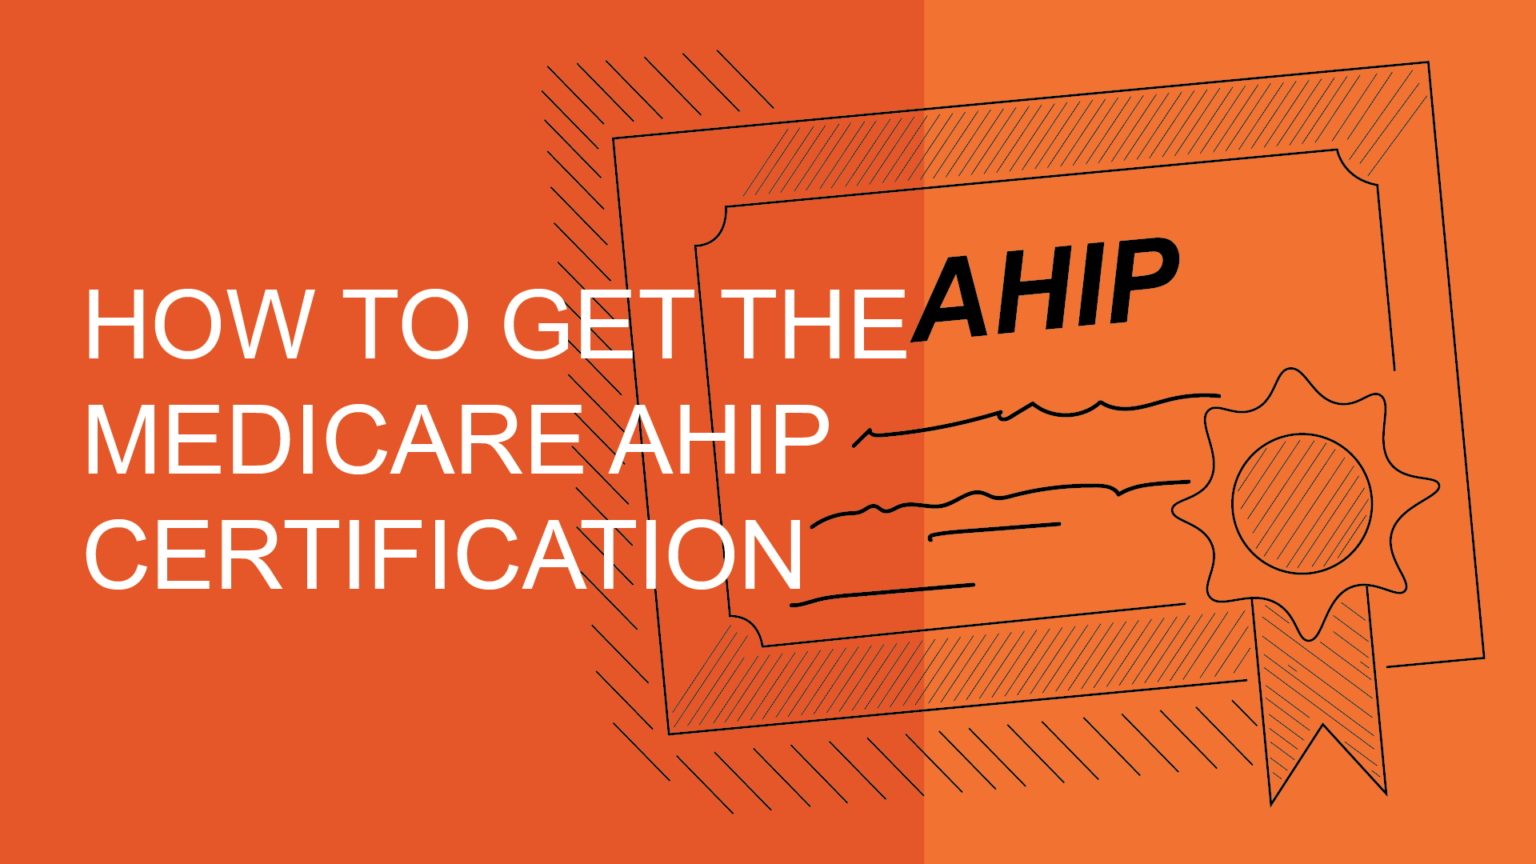 How To Get The Medicare AHIP Certification Magellan Healthcare